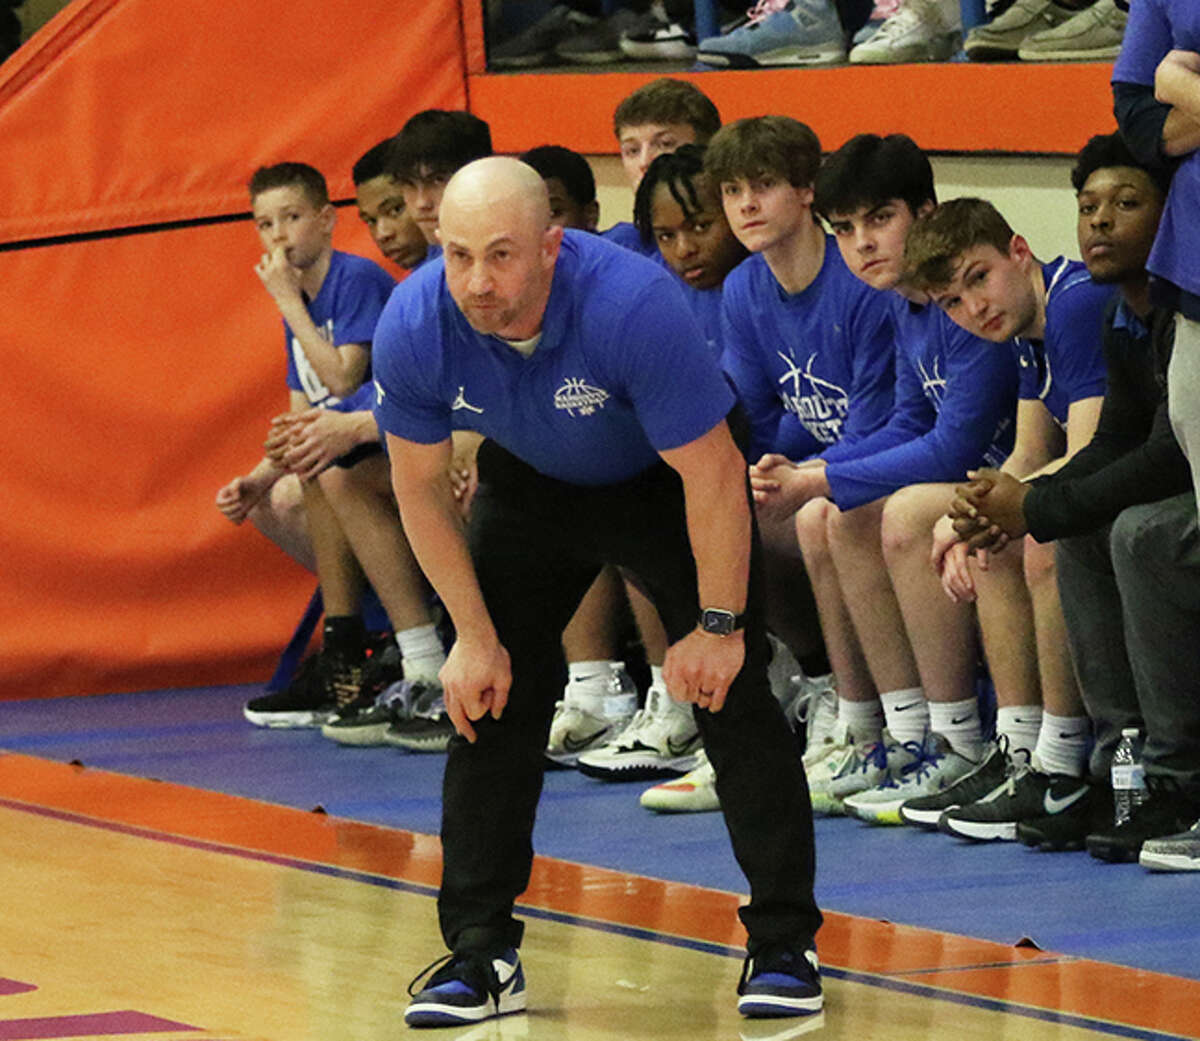 Marquette coach Steve Medford watches his team run offense in the first half against Teutopolis on Tuesday night in the semifinals of the Flora Class 2A Sectional.